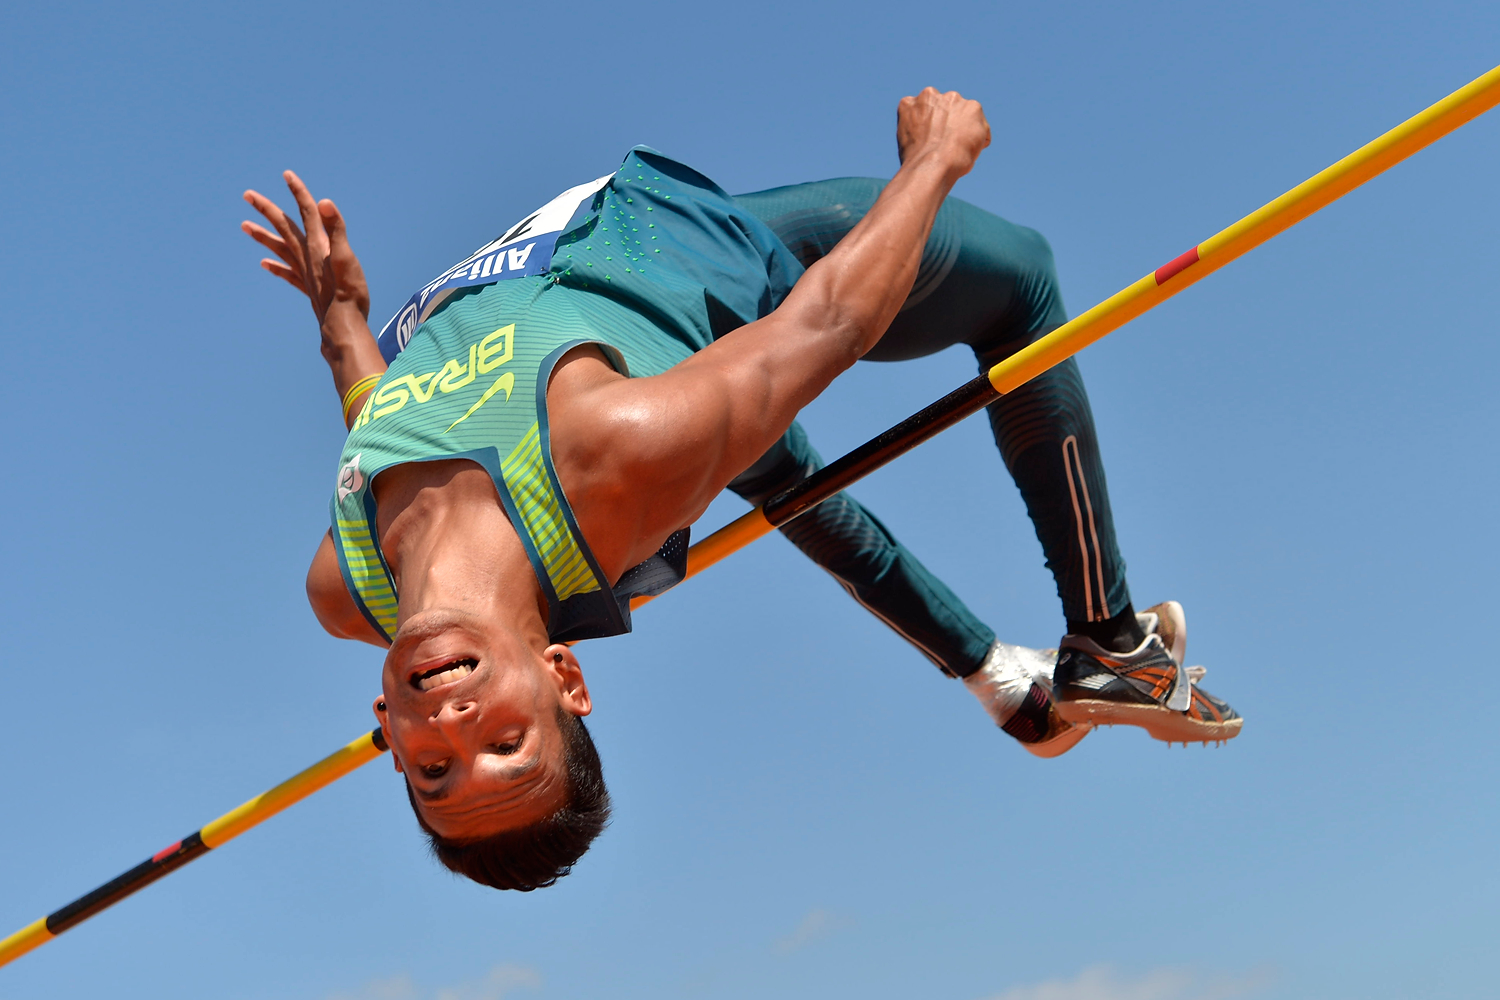 Brazilian athlete clears a bar in the high jump